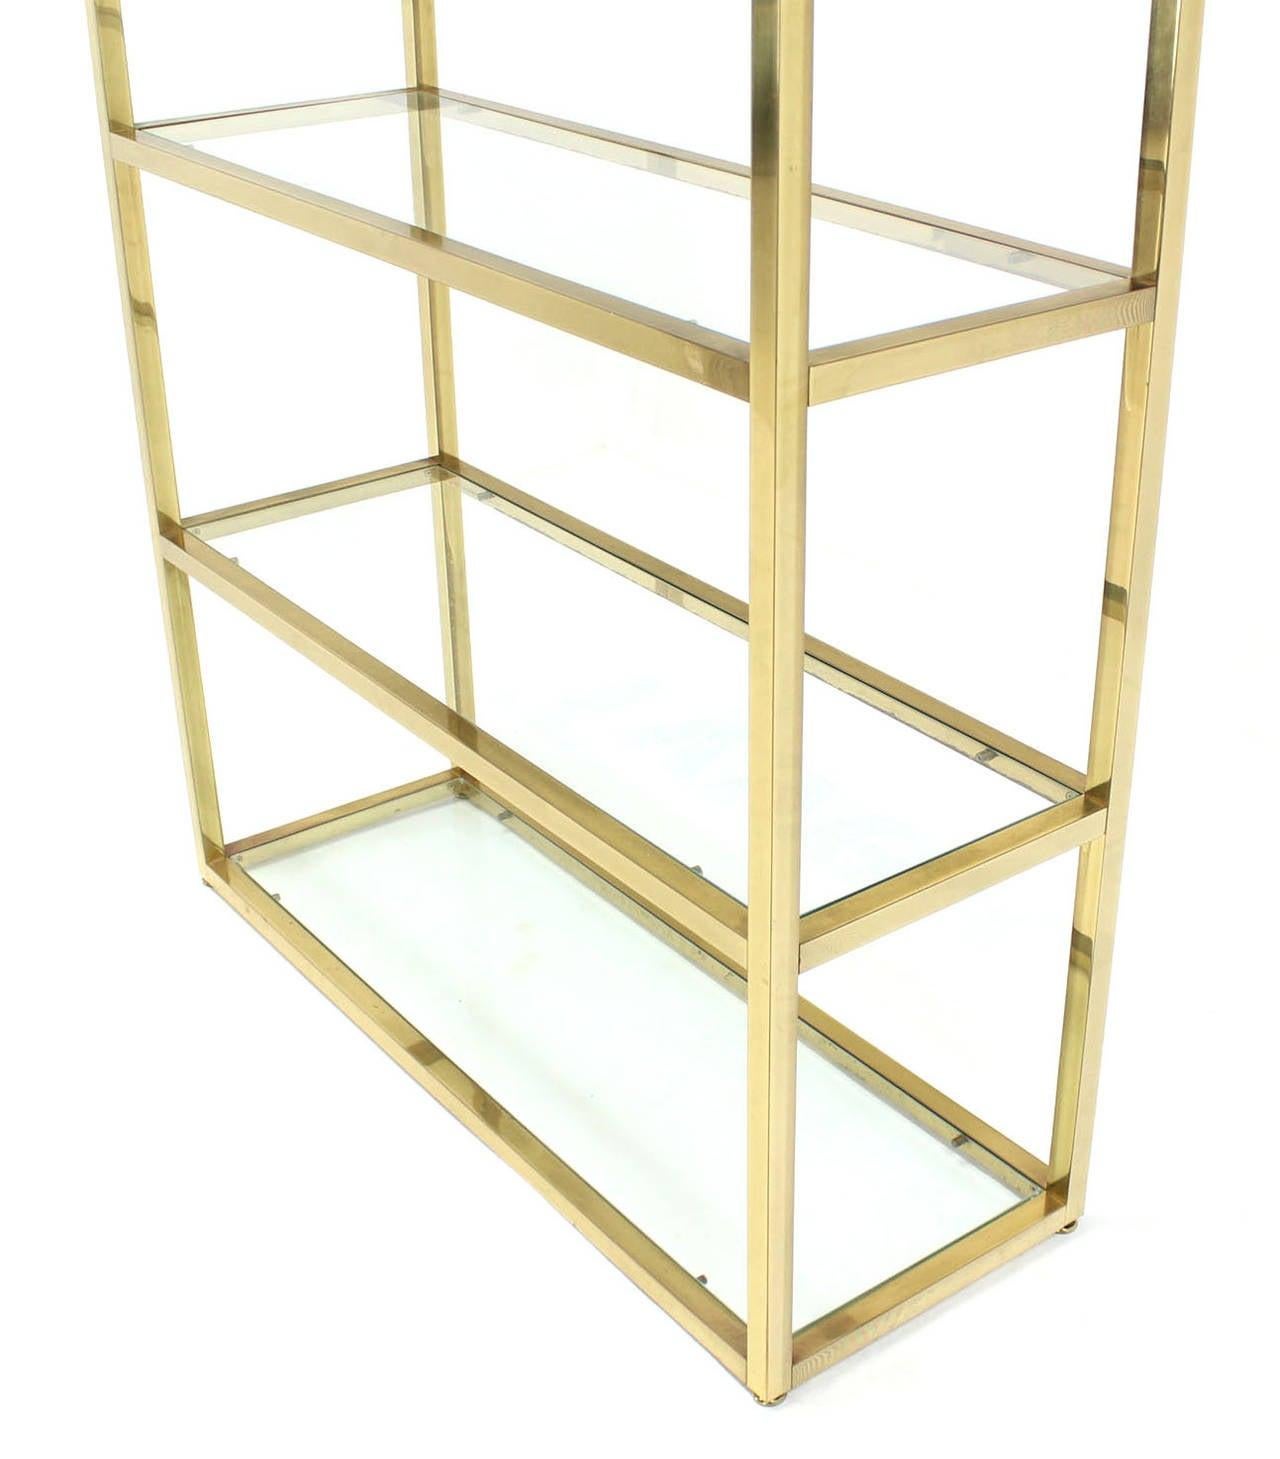 Polished Solid Square Brass Tube Five Glass Shelves Etagere Display Fixture Vitrine For Sale